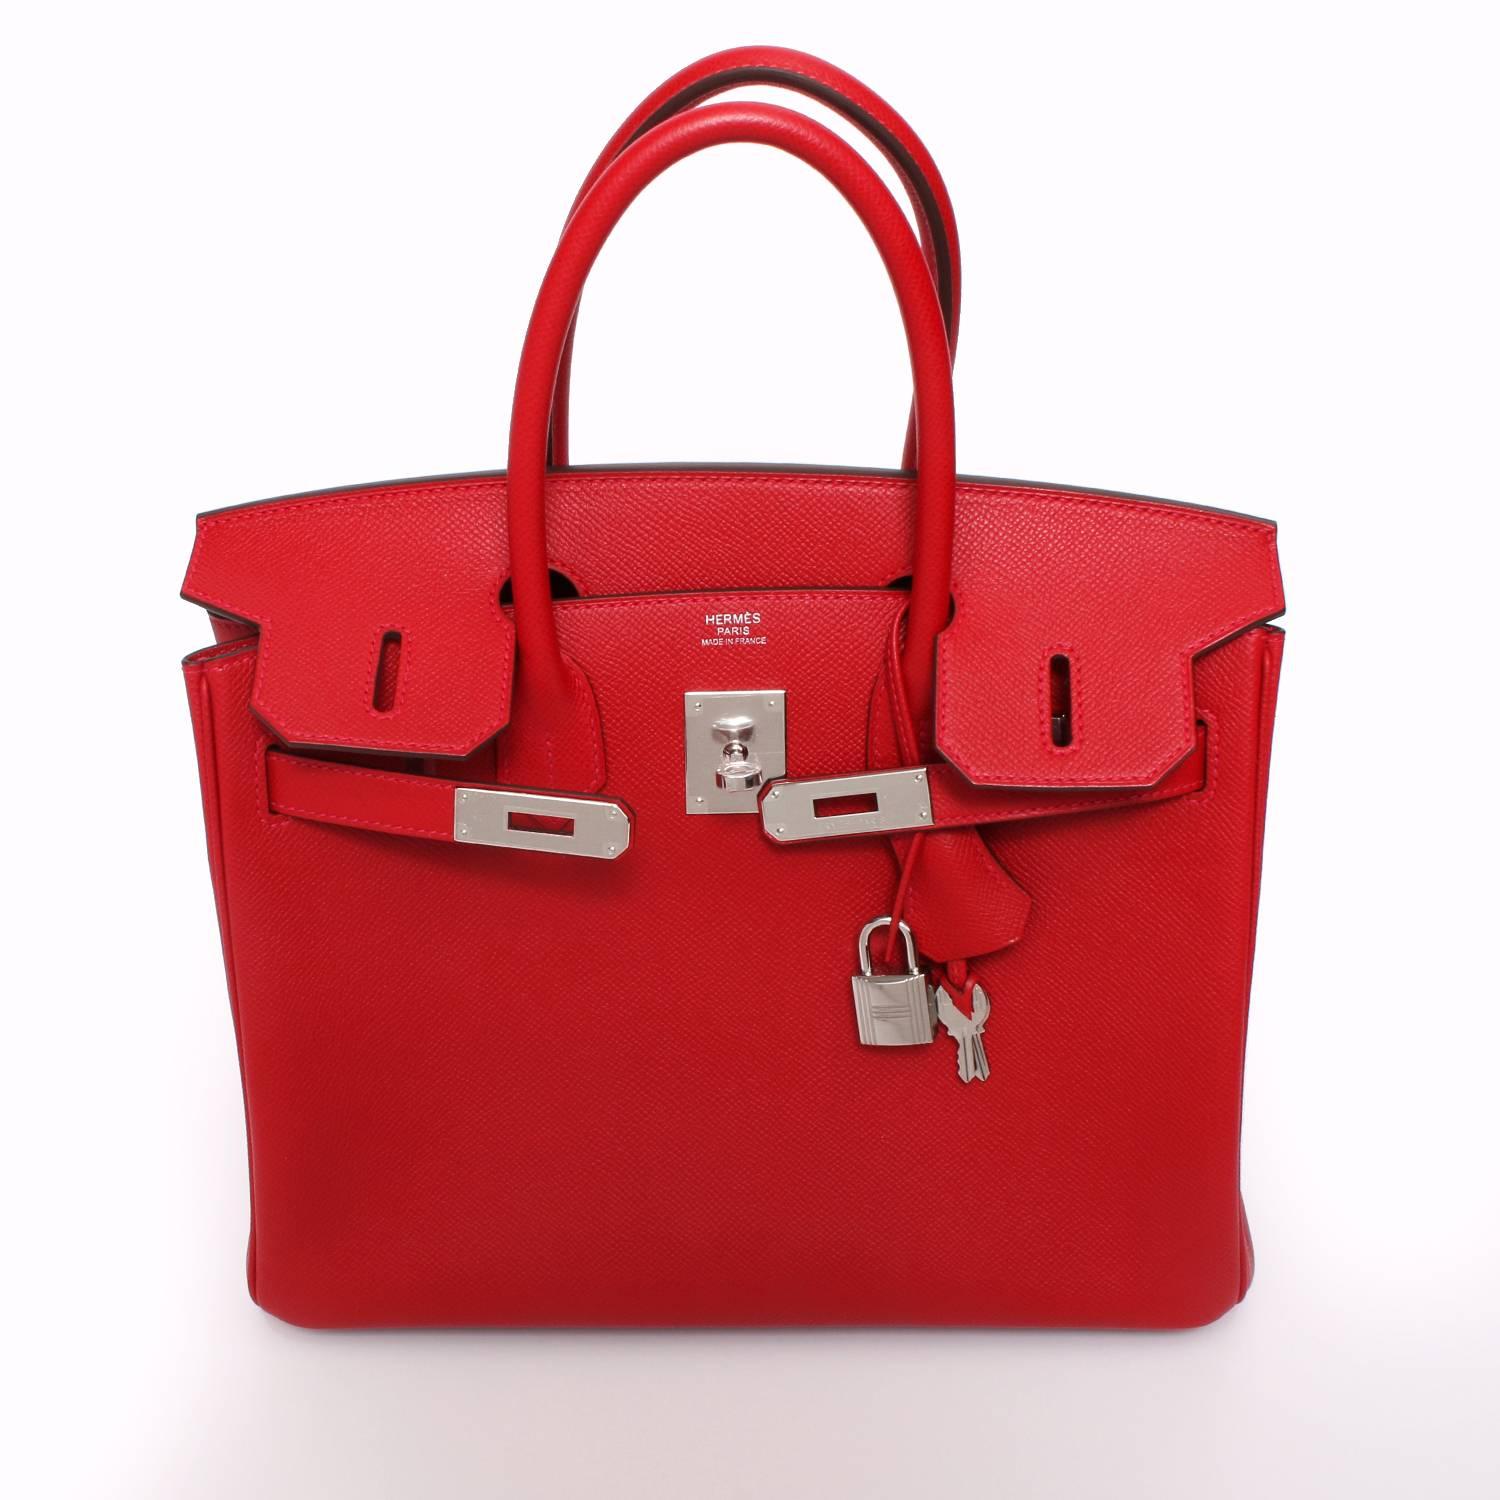 Hermes Birkin Bag 30 cm Rouge Casaque Togo Palladium Hardware. Brand new in box. Store fresh. Pristine condition (with plastic on hardware). Purchased at the Hermes store in January, 2018
Bag is a 2017 model but bought new and never used. Comes with